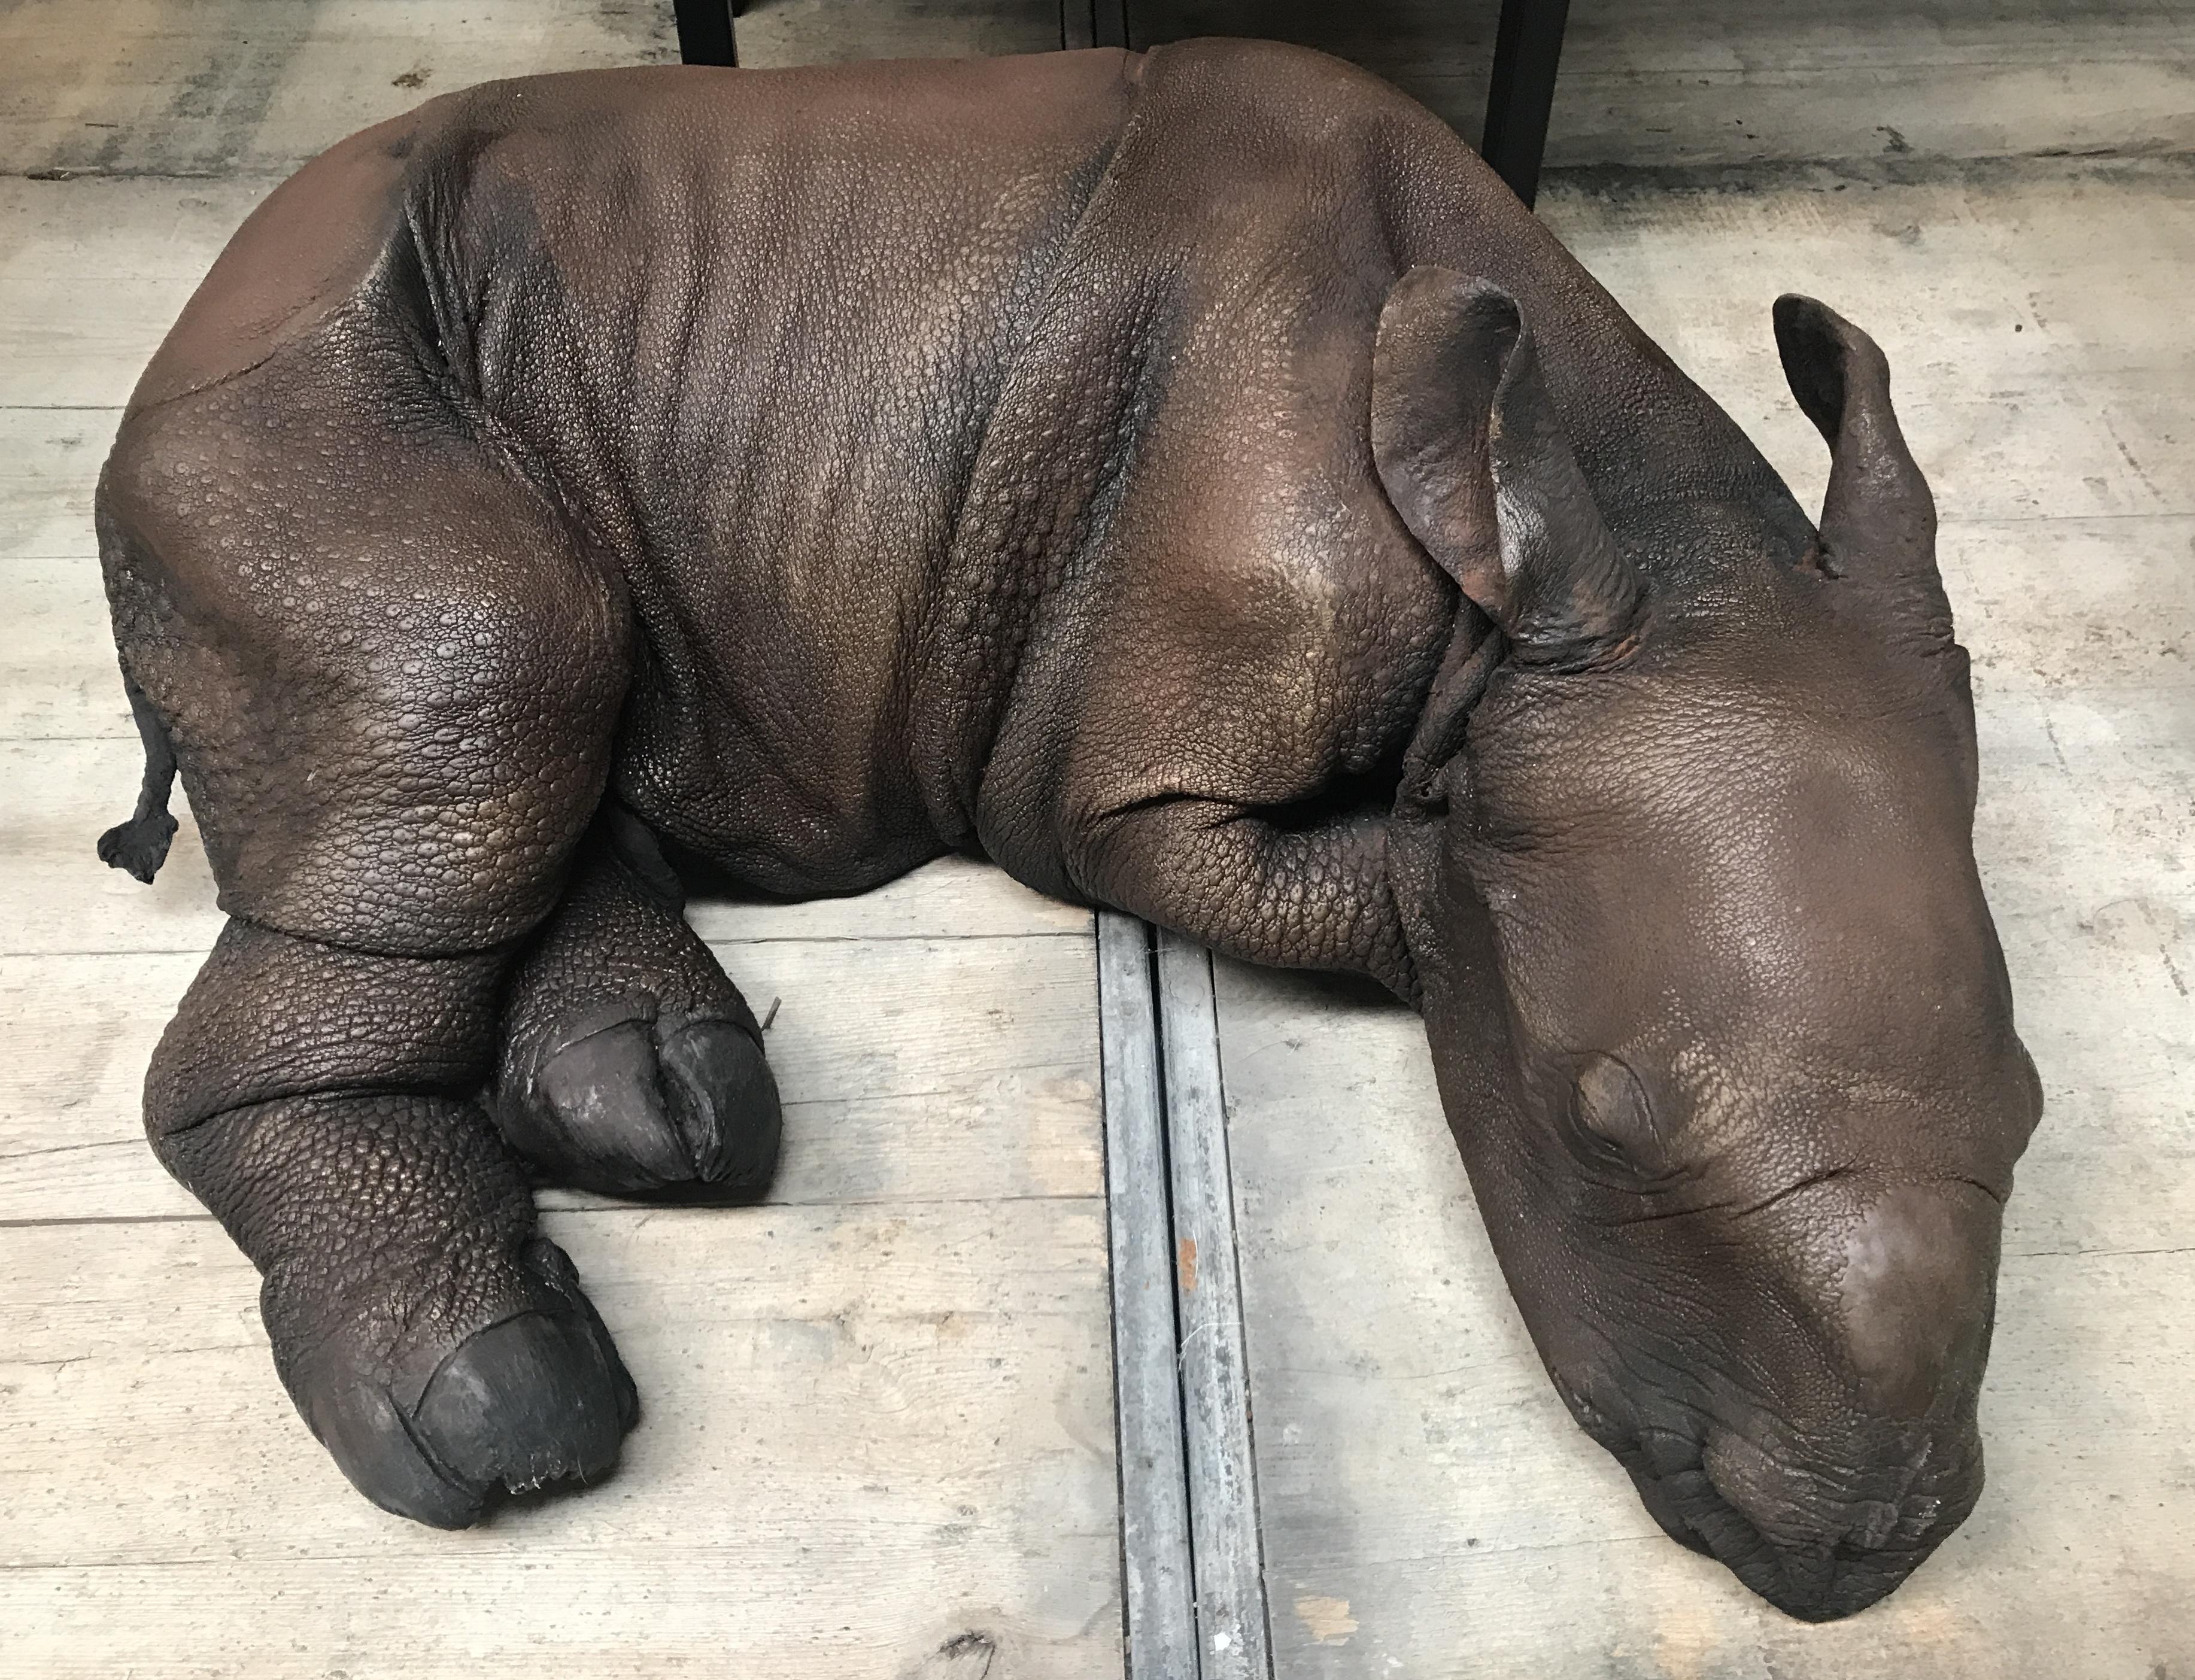 Lifelike replica of a rhino calf. The calf has all the details and can not be distinguished from real.